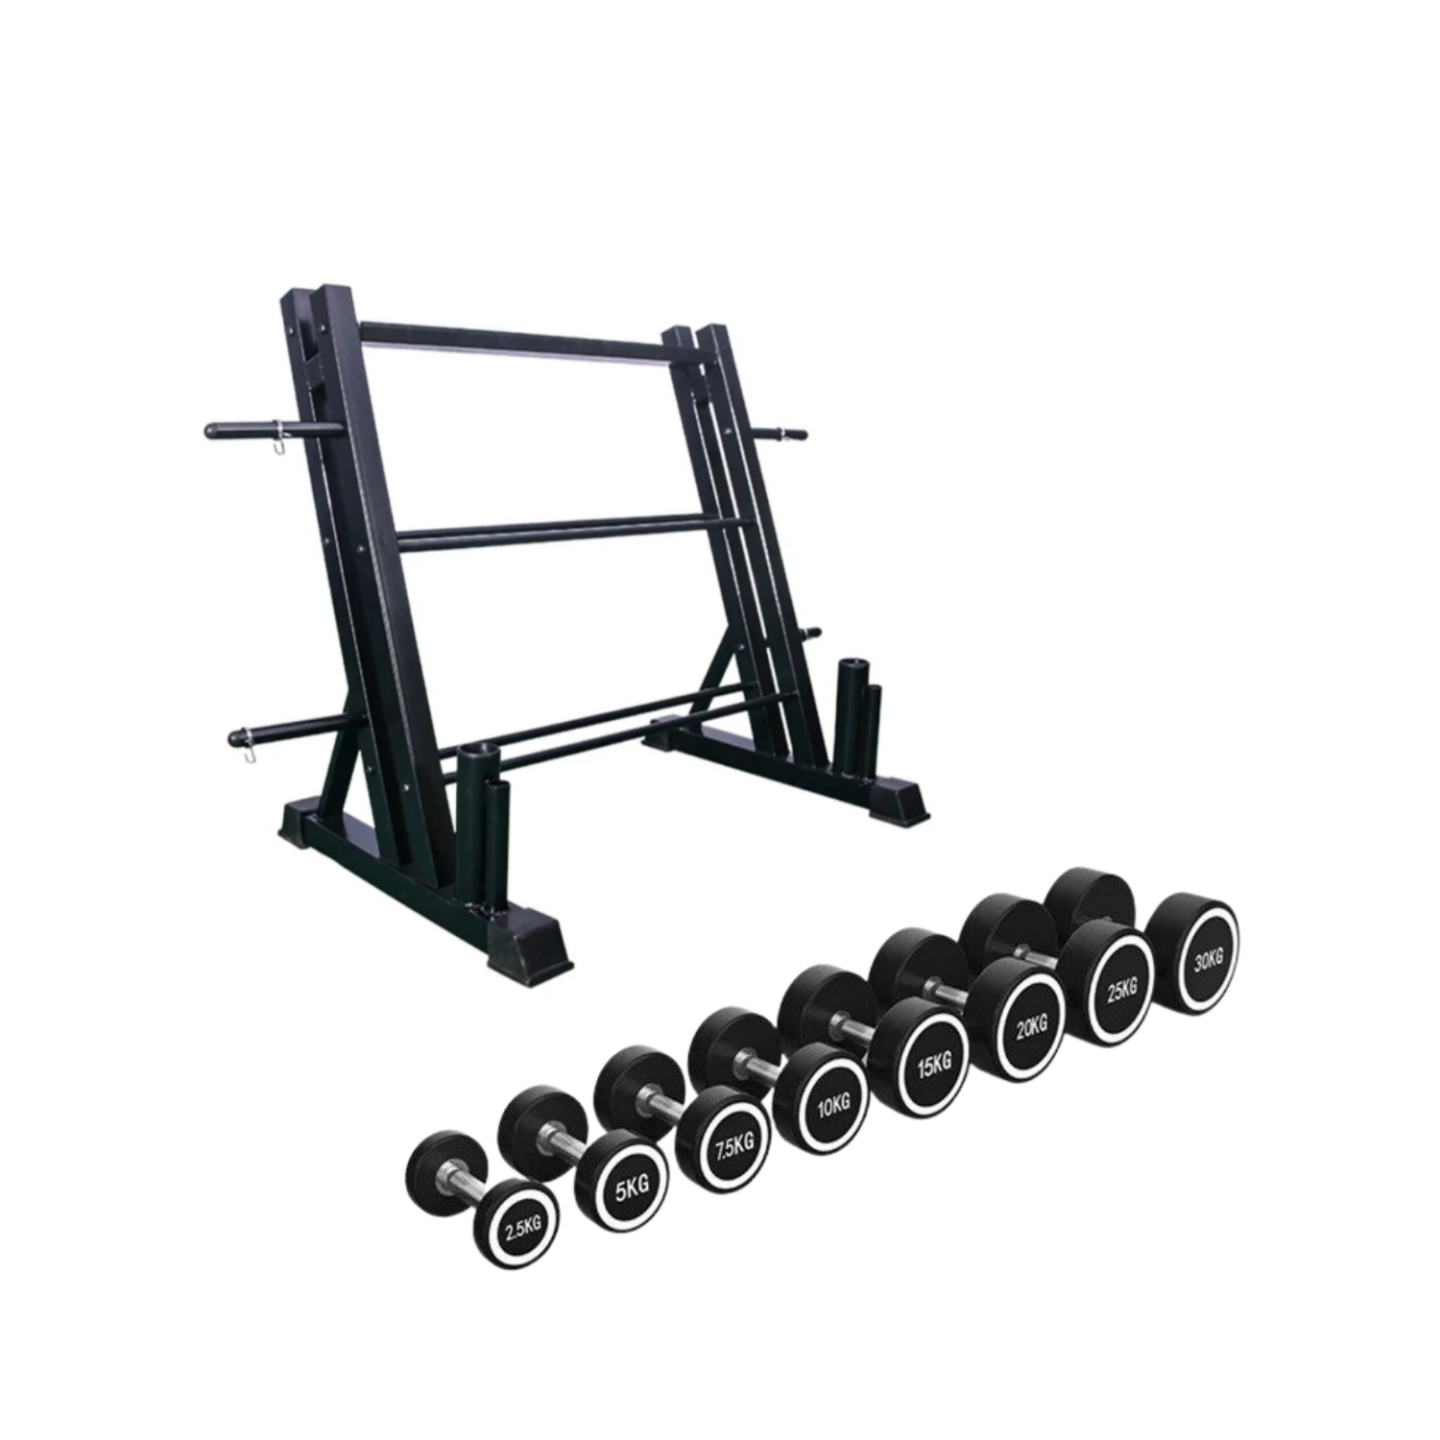 Round Dumbbells Set|2.5KG to 20KG with Stand